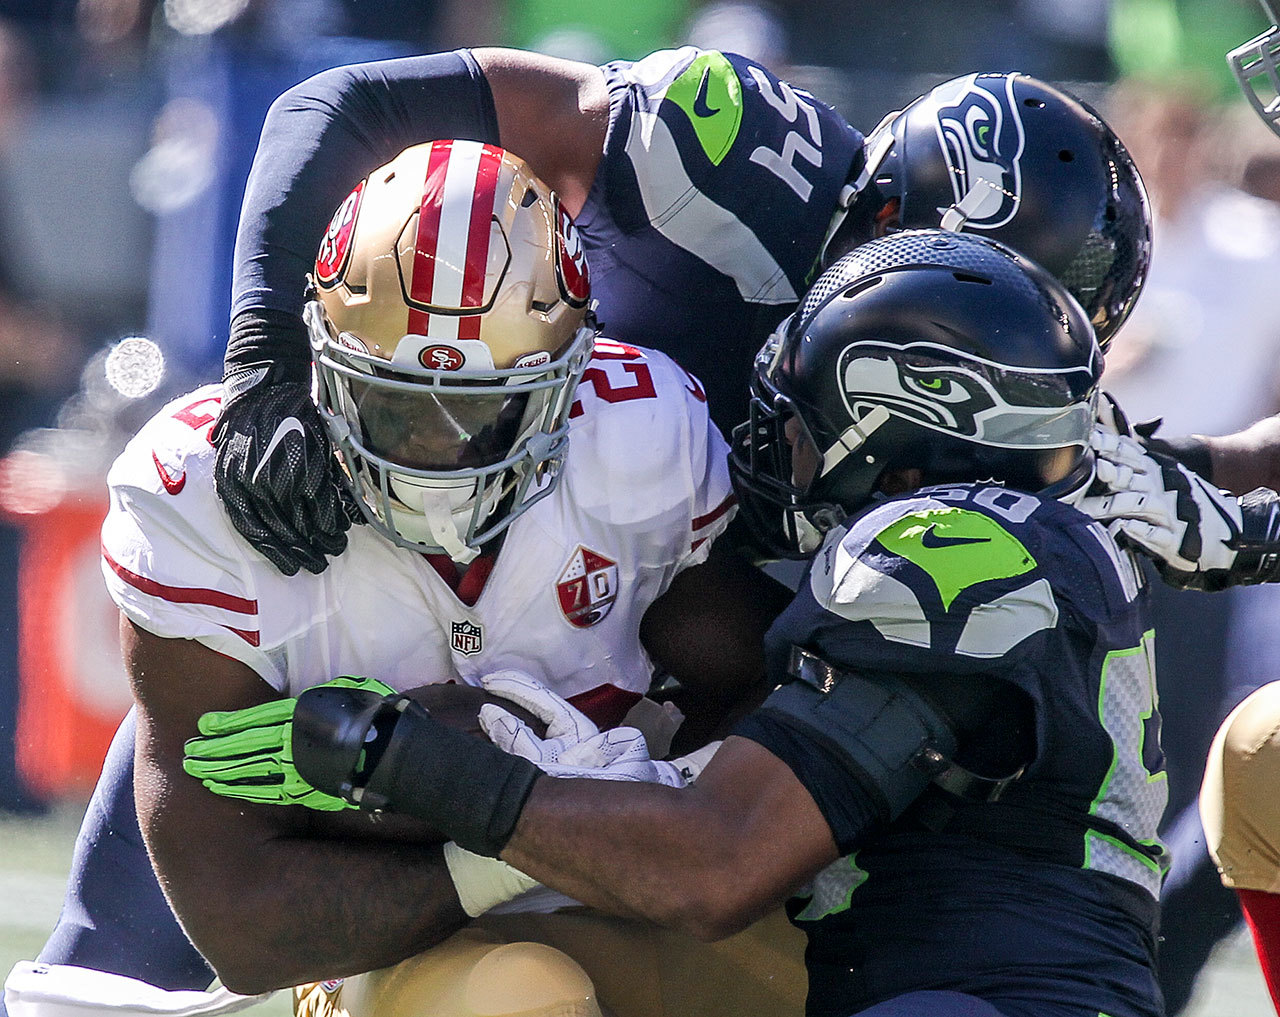 Kevin Clark / The Herald
49ers running back Carlos Hyde is tackled by Seahawks linebackers Bobby Wagner (top) and K.J. Wright during Sunday’s game at CenturyLink Field.
